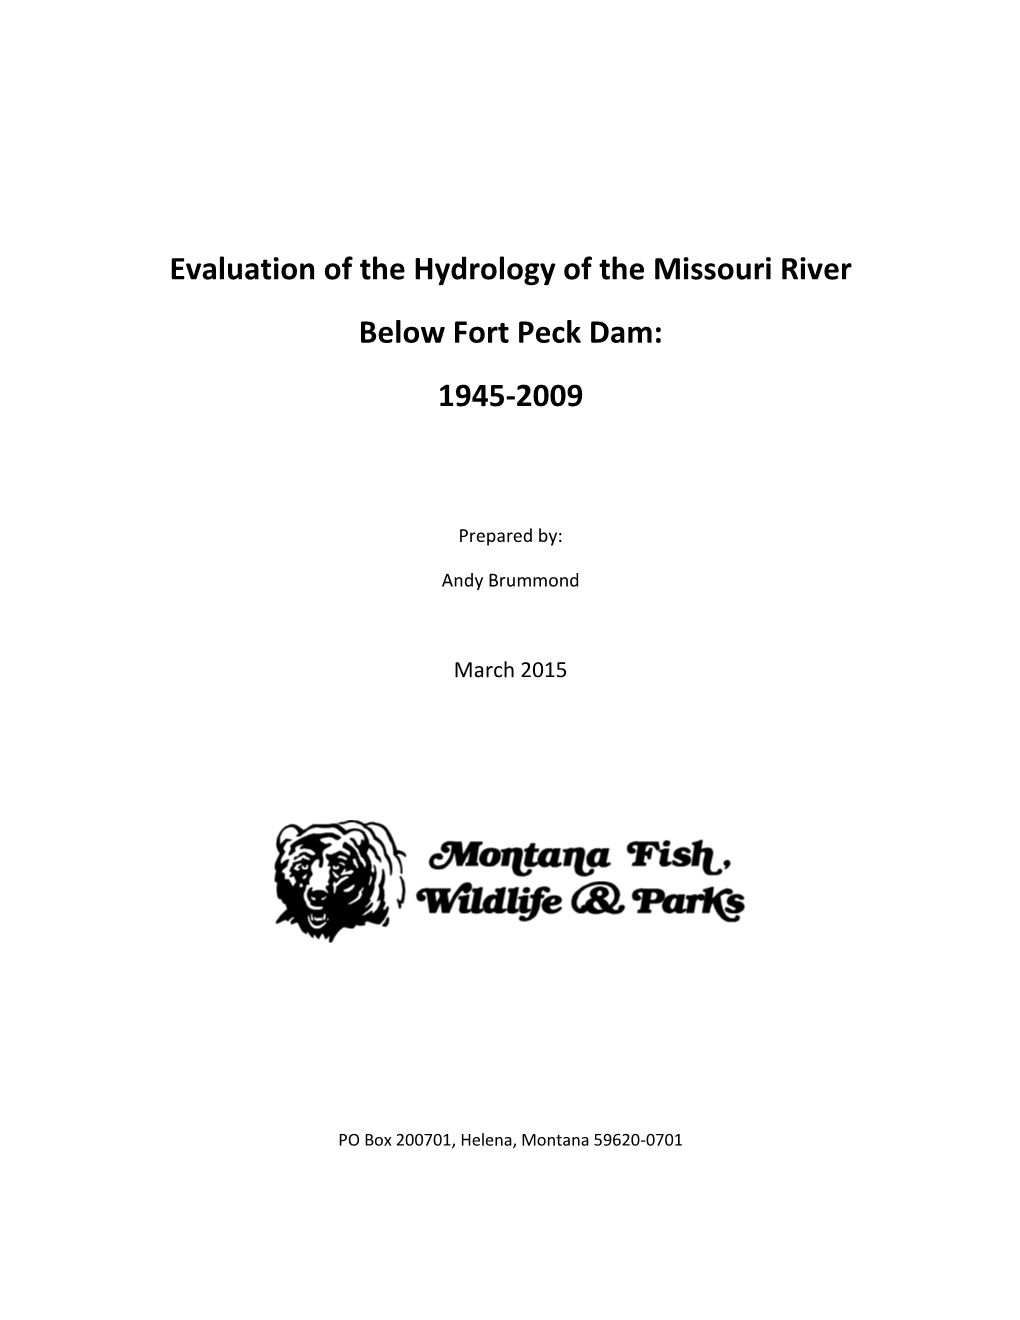 Evaluation of the Hydrology of the Missouri River Below Fort Peck Dam: 1945-2009